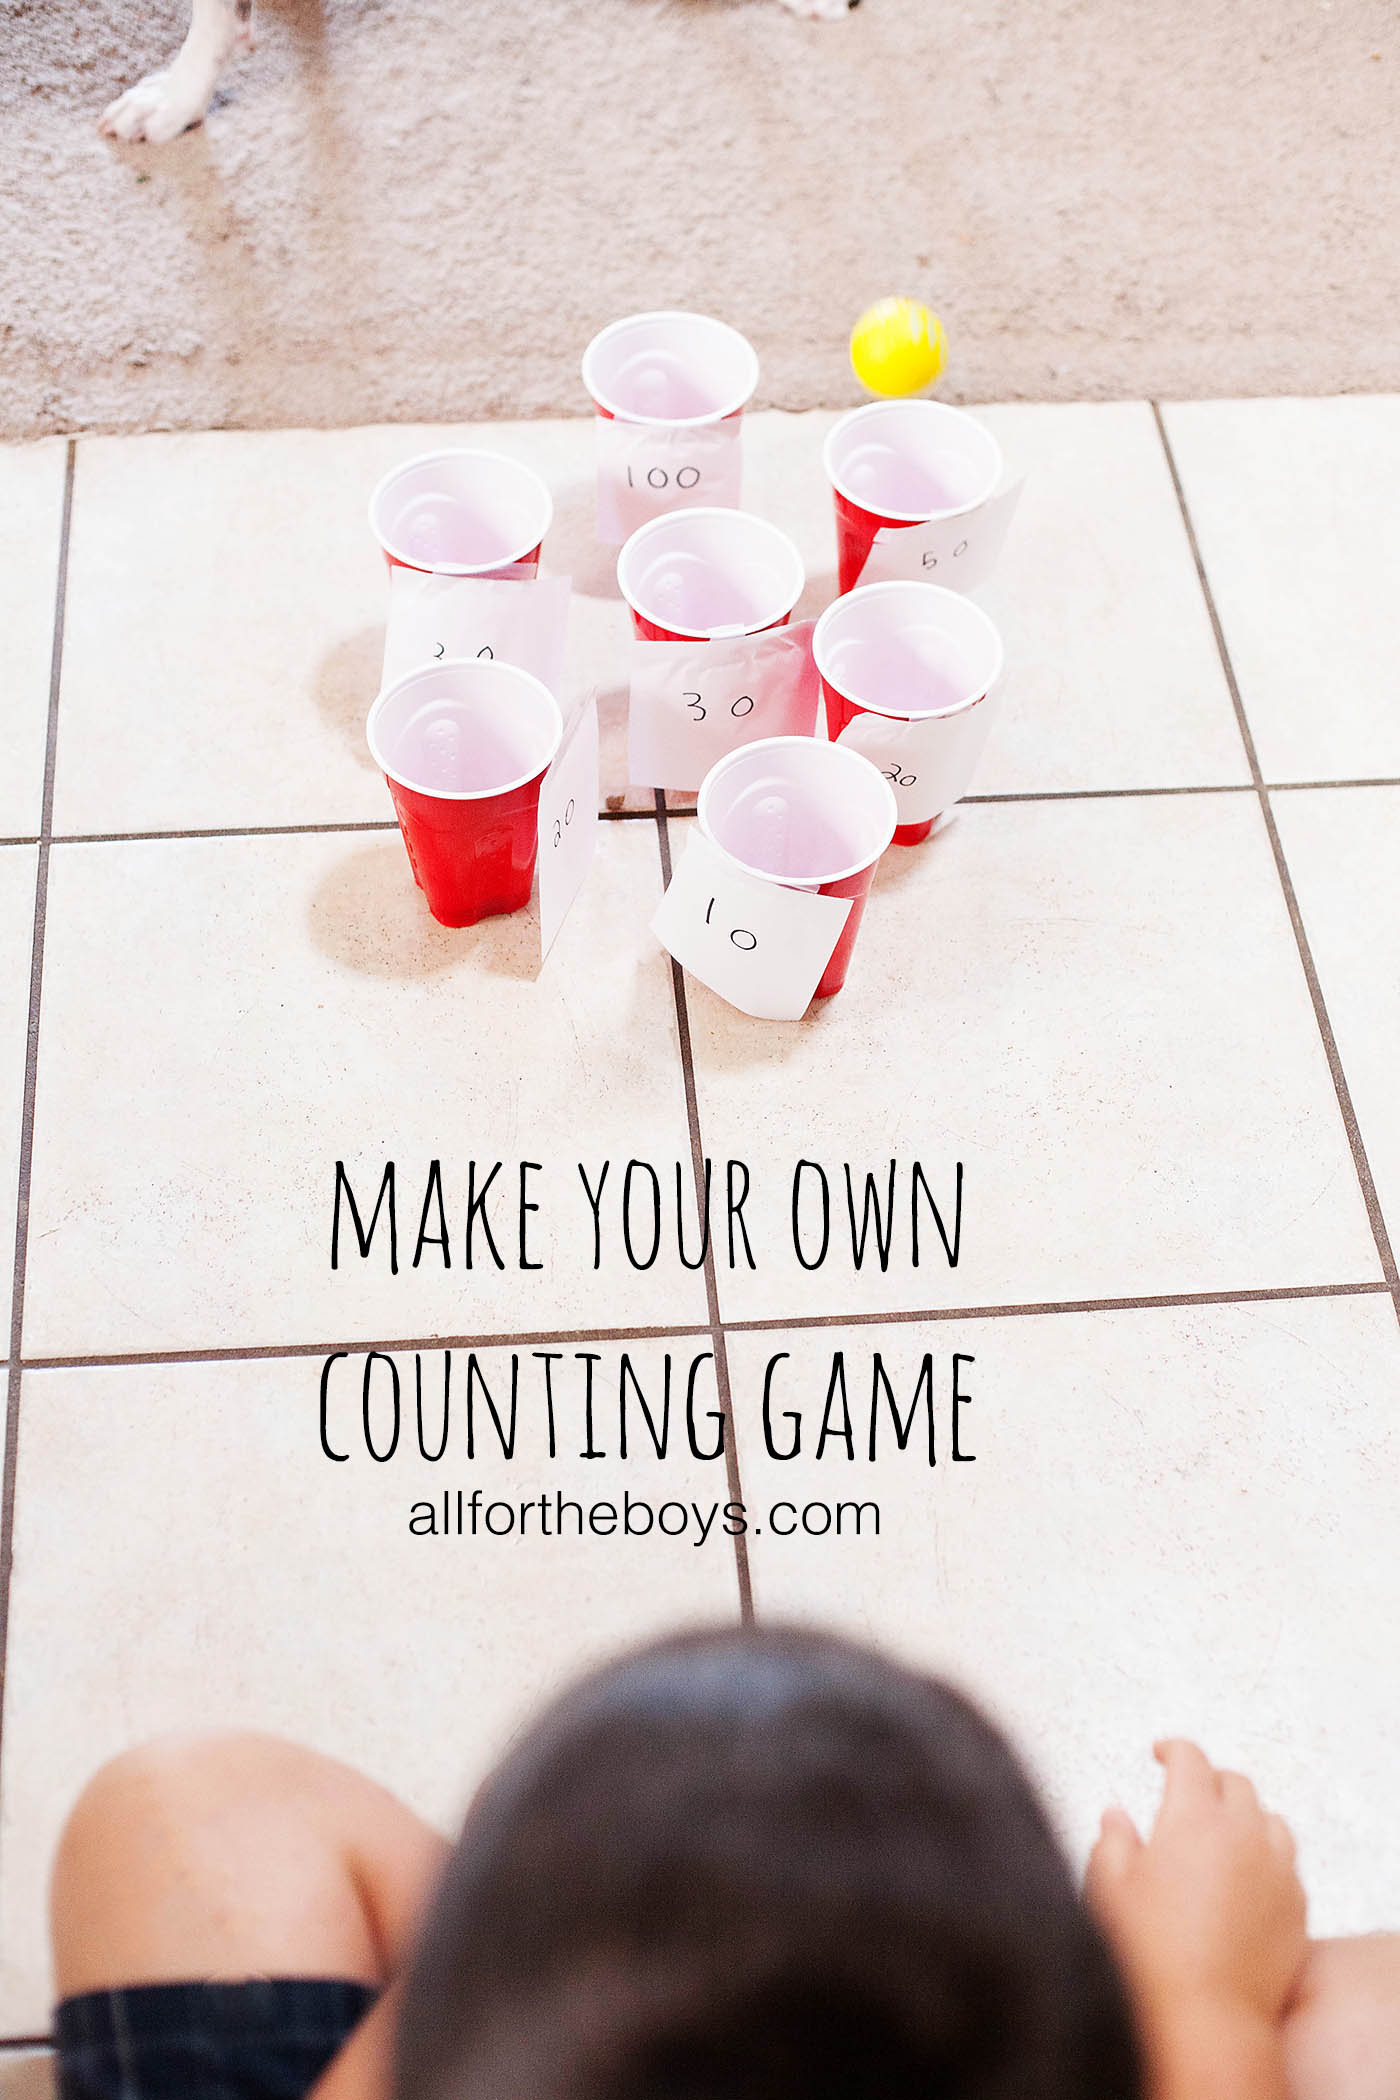 Make your own game using plastic cups - from All for the Boys